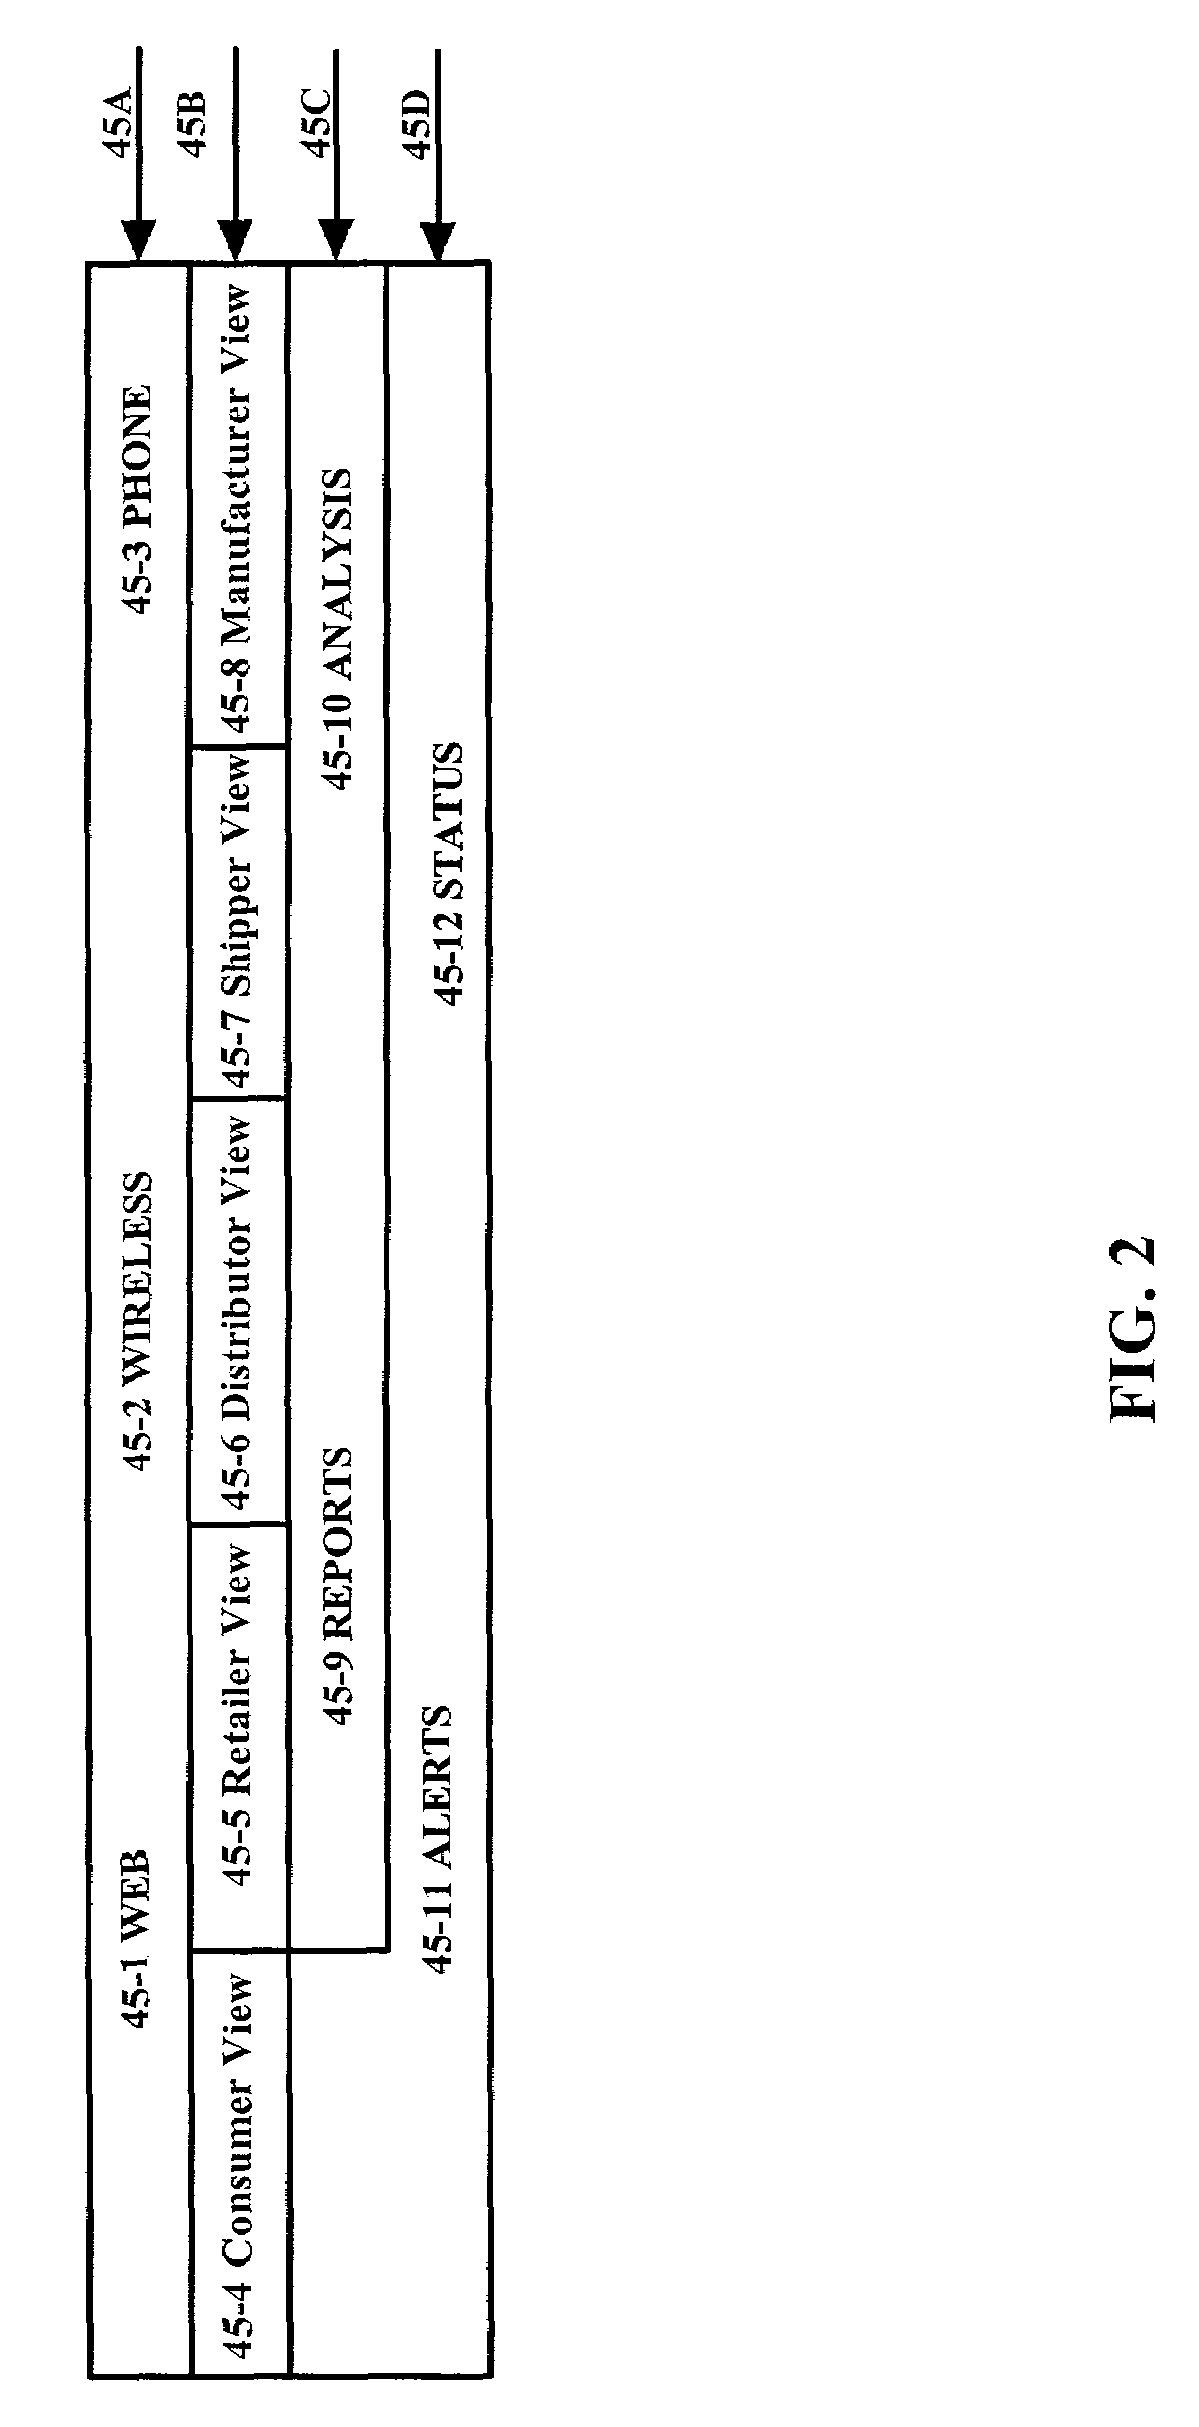 Method and apparatus for creating and exposing order status within a supply chain having disparate systems